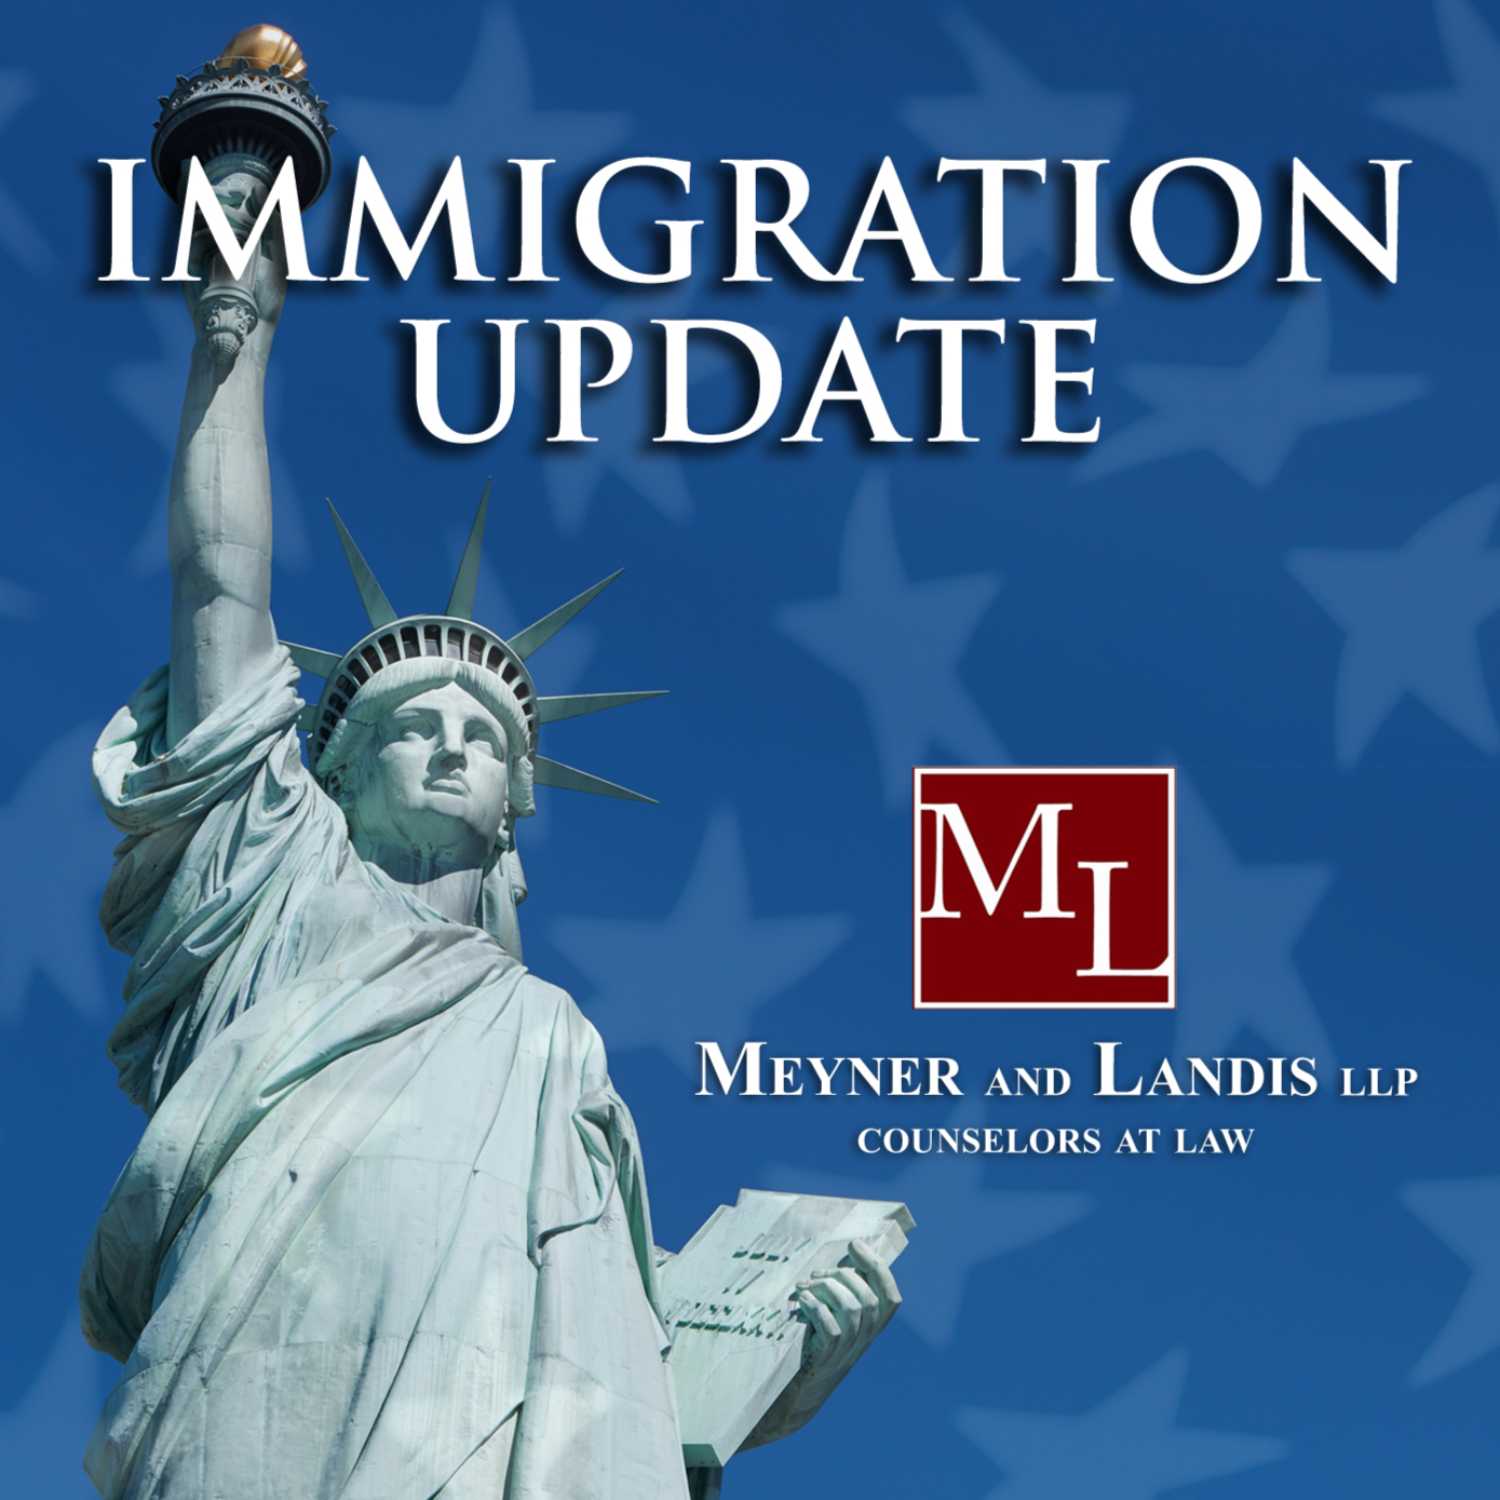 Feb 15, 2021: Our H-1B wasn't selected! Now what do we do?